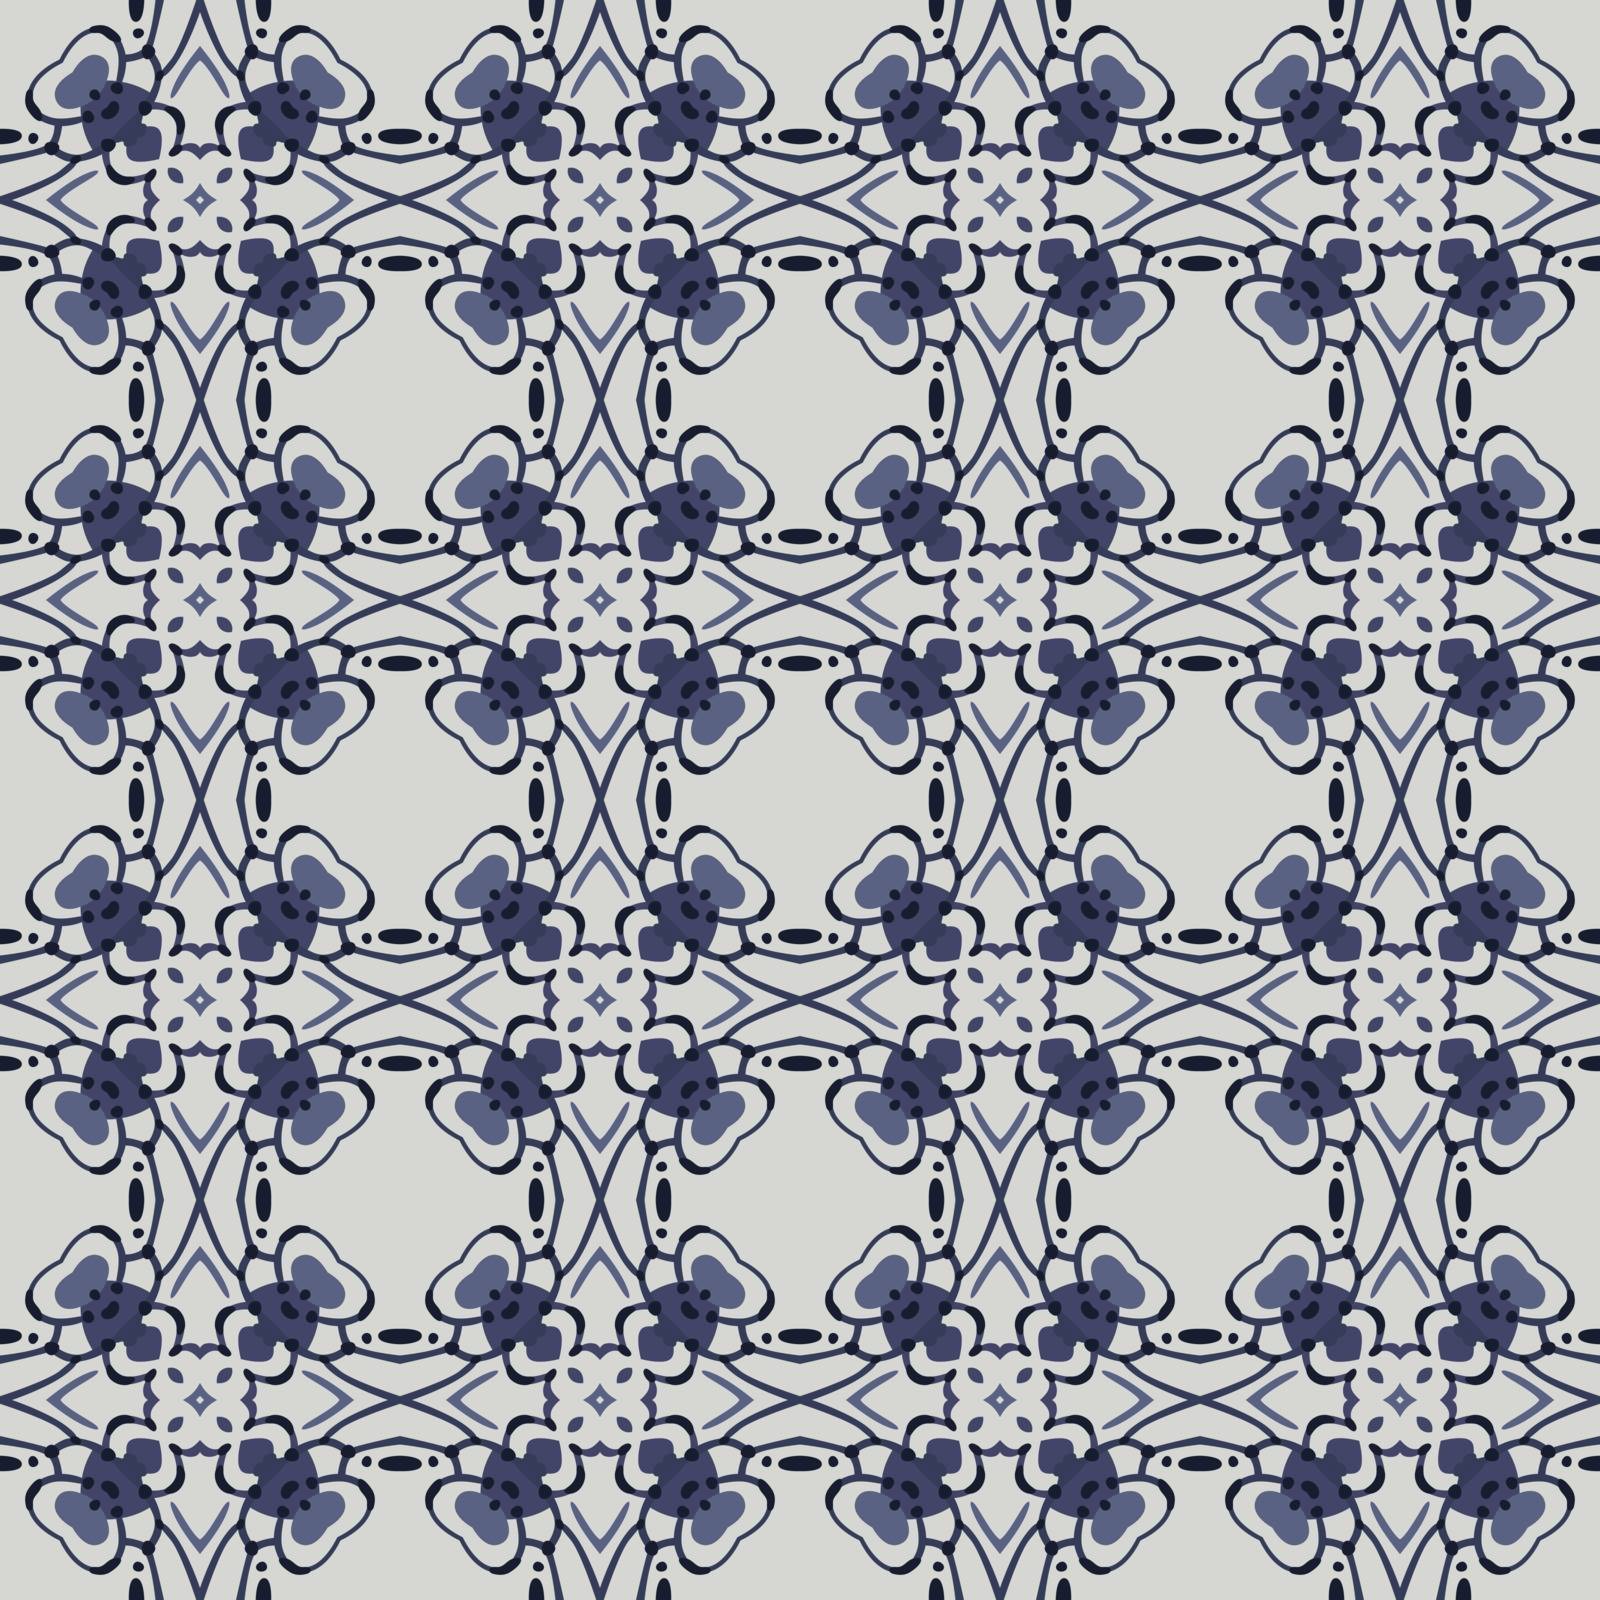 Seamless illustrated pattern made of abstract elements in white and blue